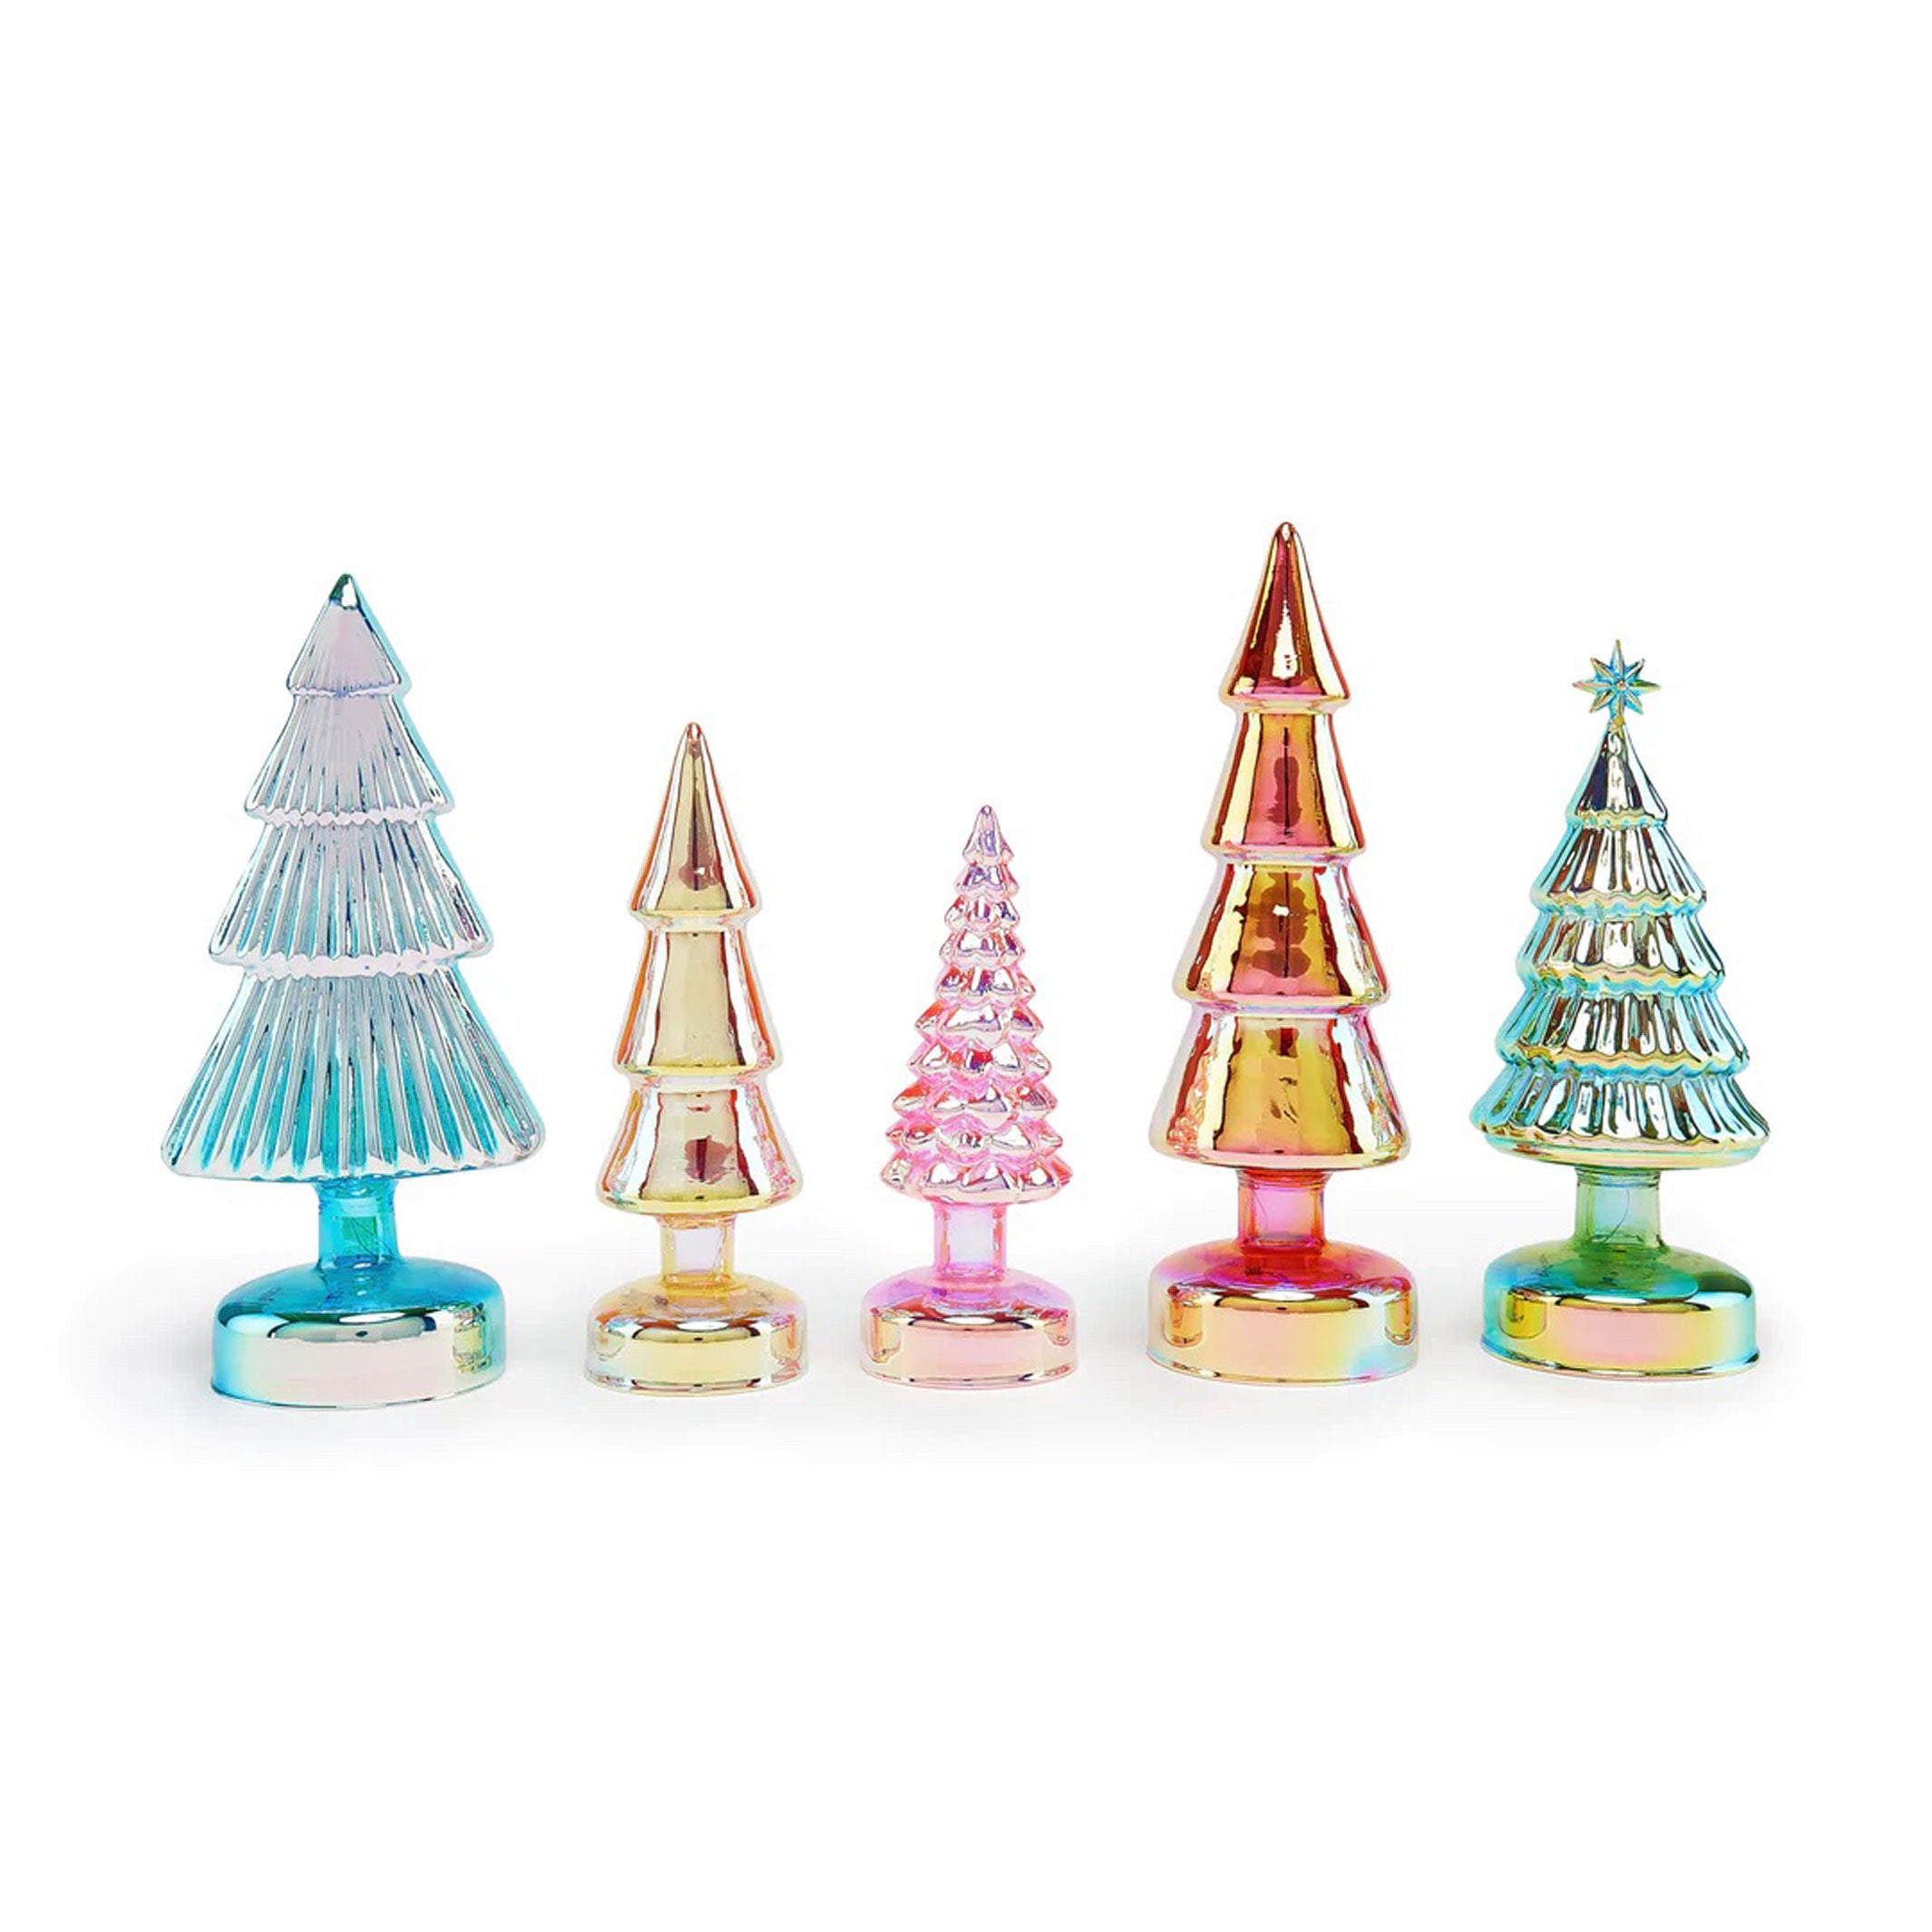 Small Colorful LED GLASS LIGHTED TREES | Glas-TANNENBÄUME mit LED Beleuchtung | 5er Set |  MoMA